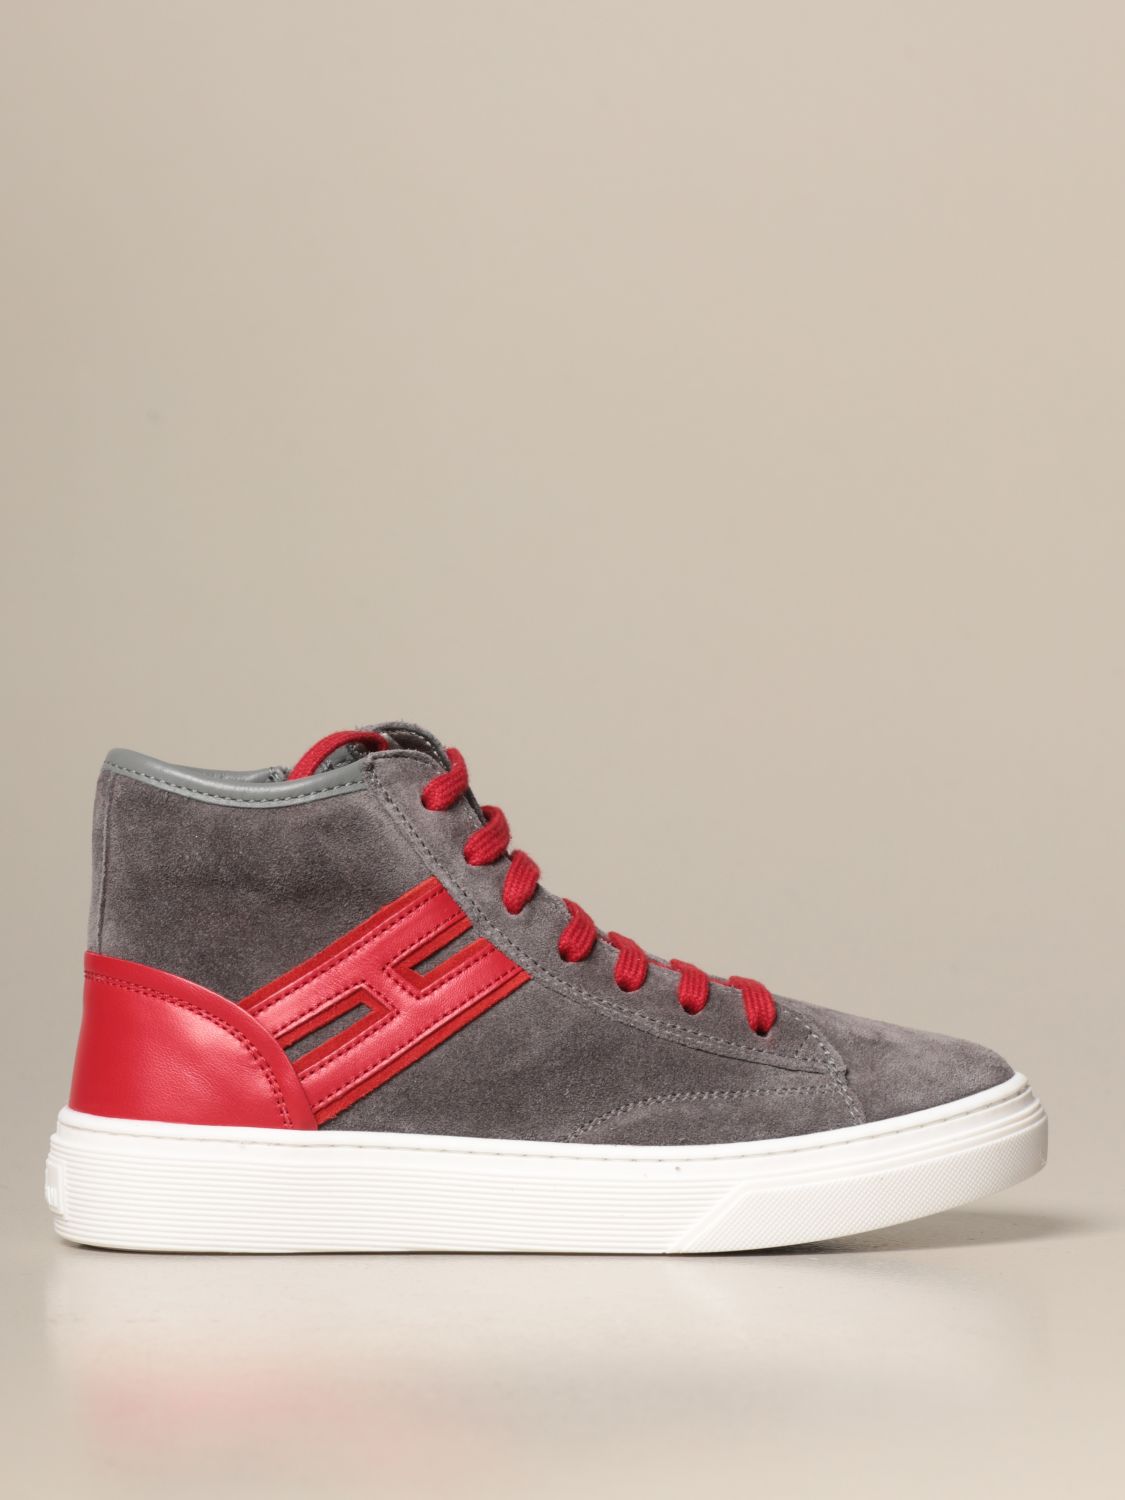 indre Oxide Nerve Hogan Outlet: H340 suede and leather sneakers | Shoes Hogan Kids Grey |  Shoes Hogan HXC3400K371 HB9 GIGLIO.COM